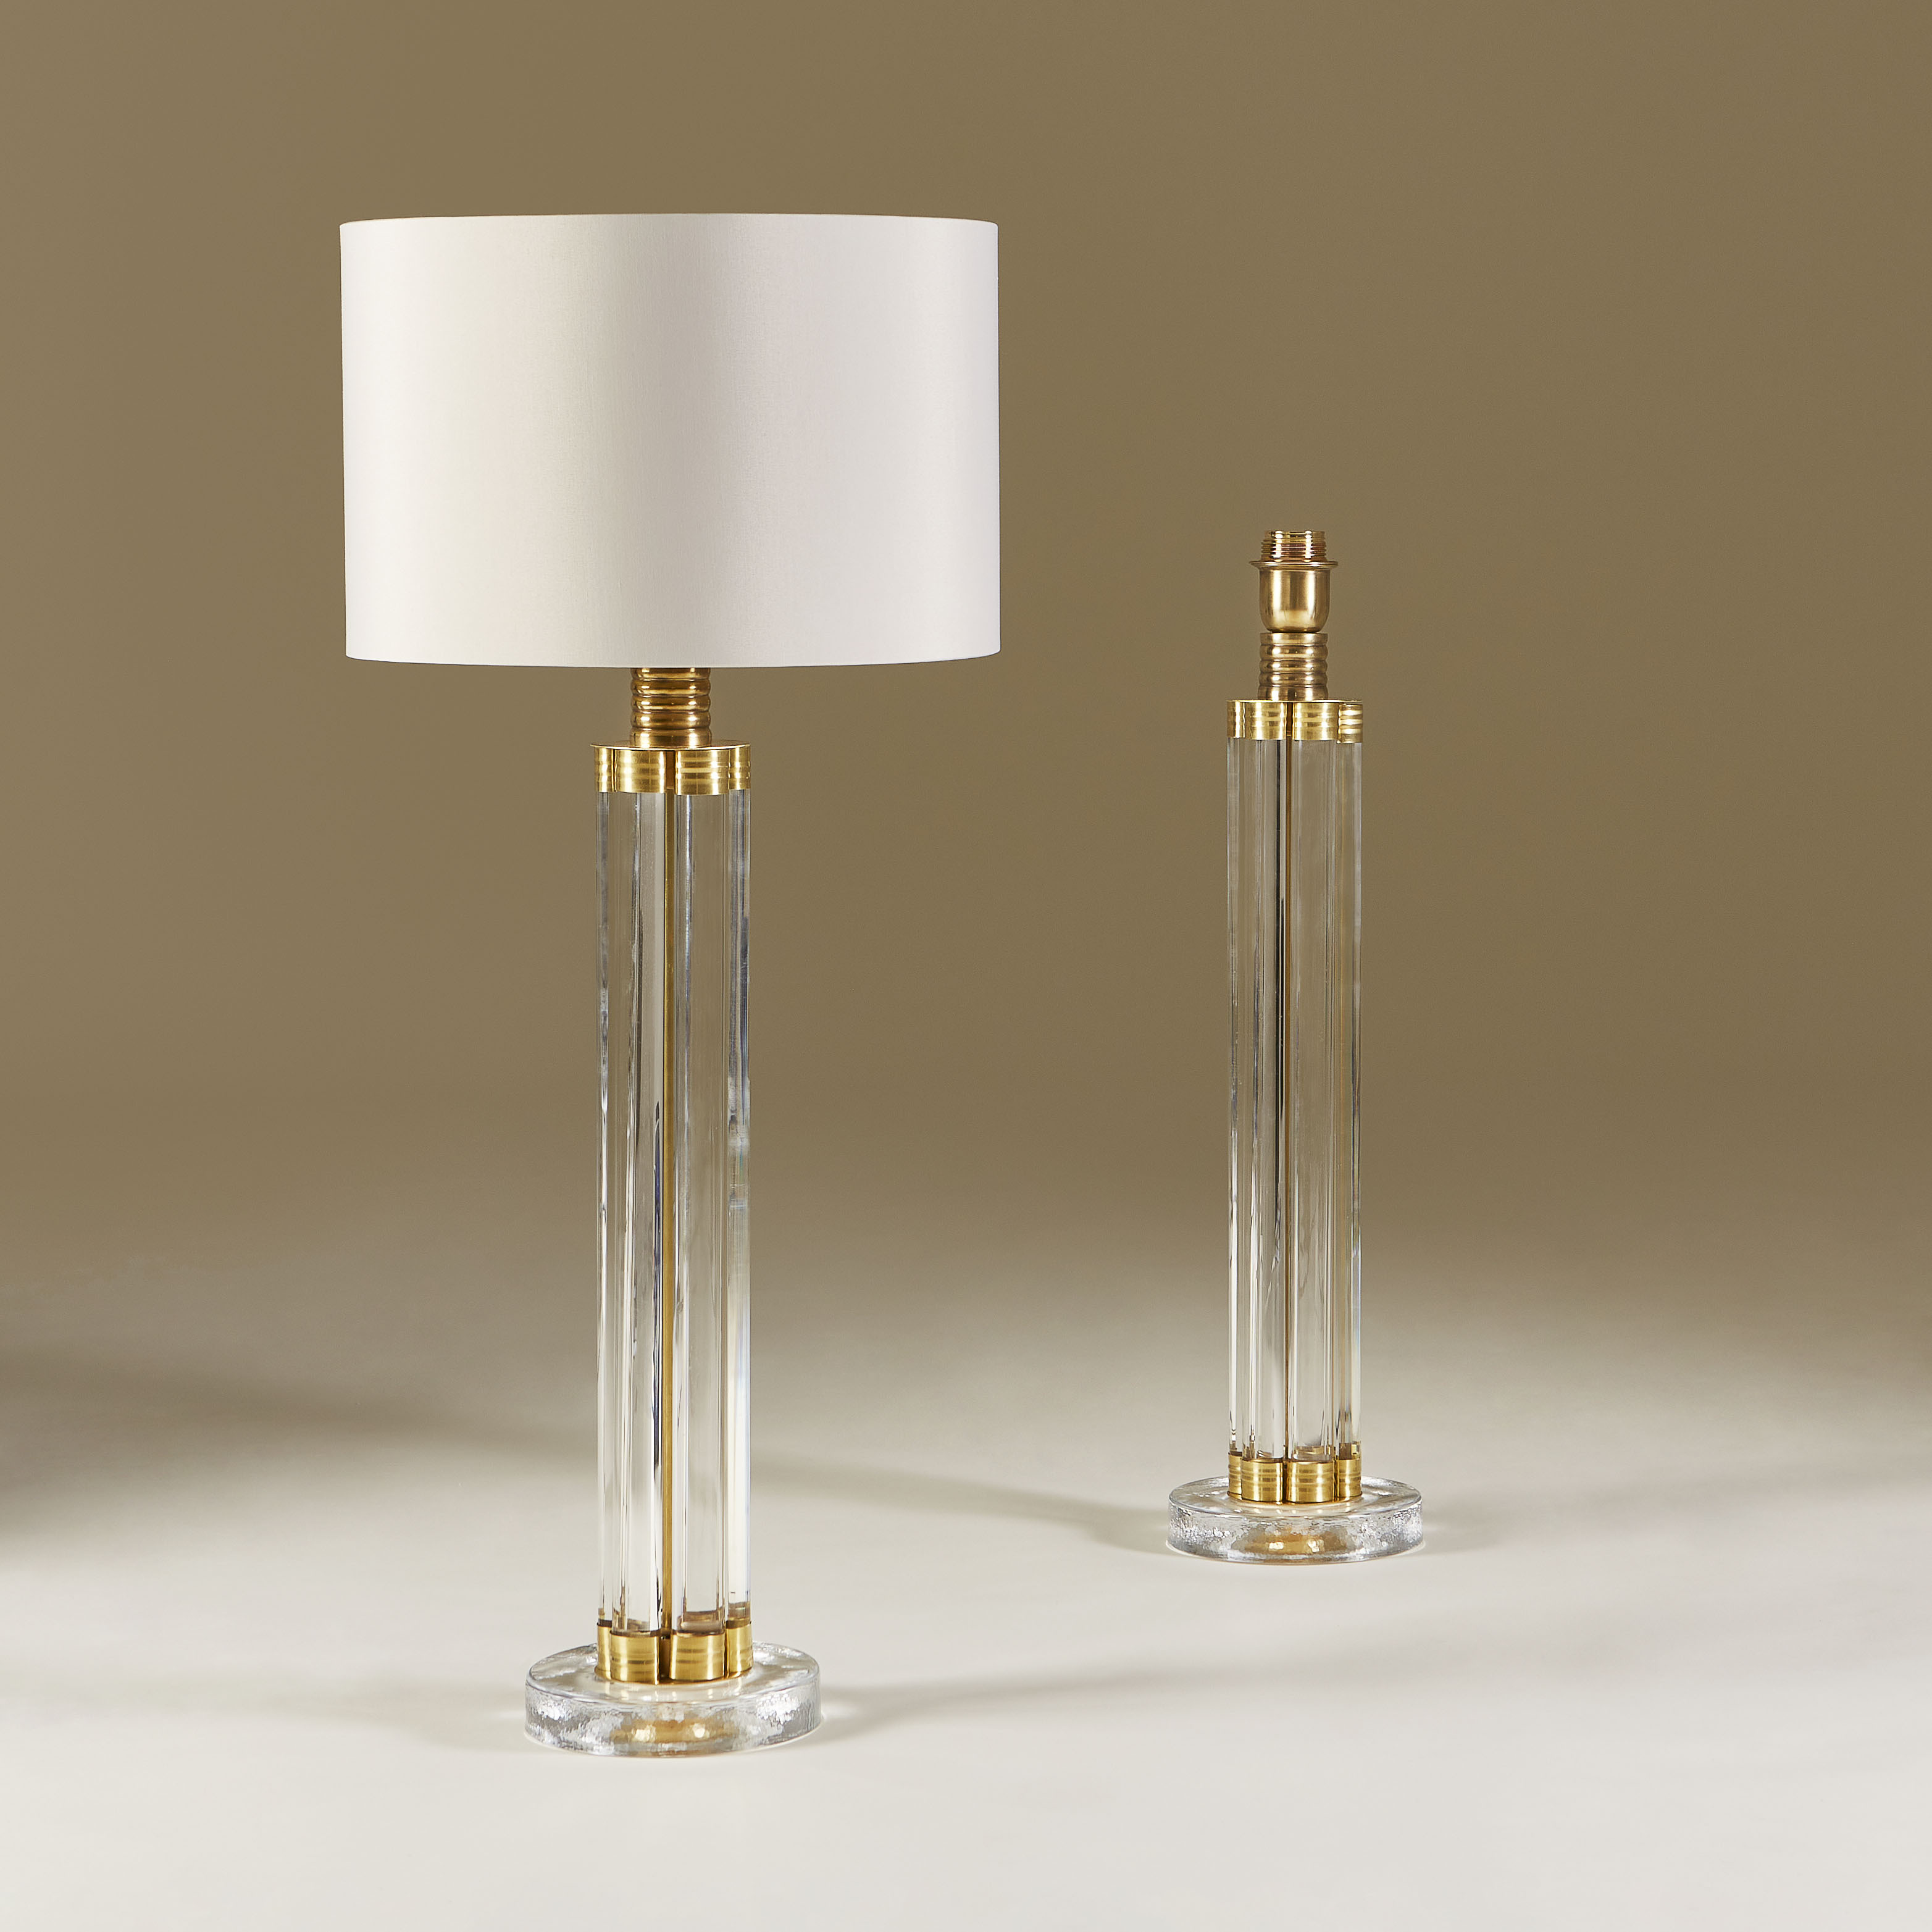 The image for Murano Column Lamps 0015 V1